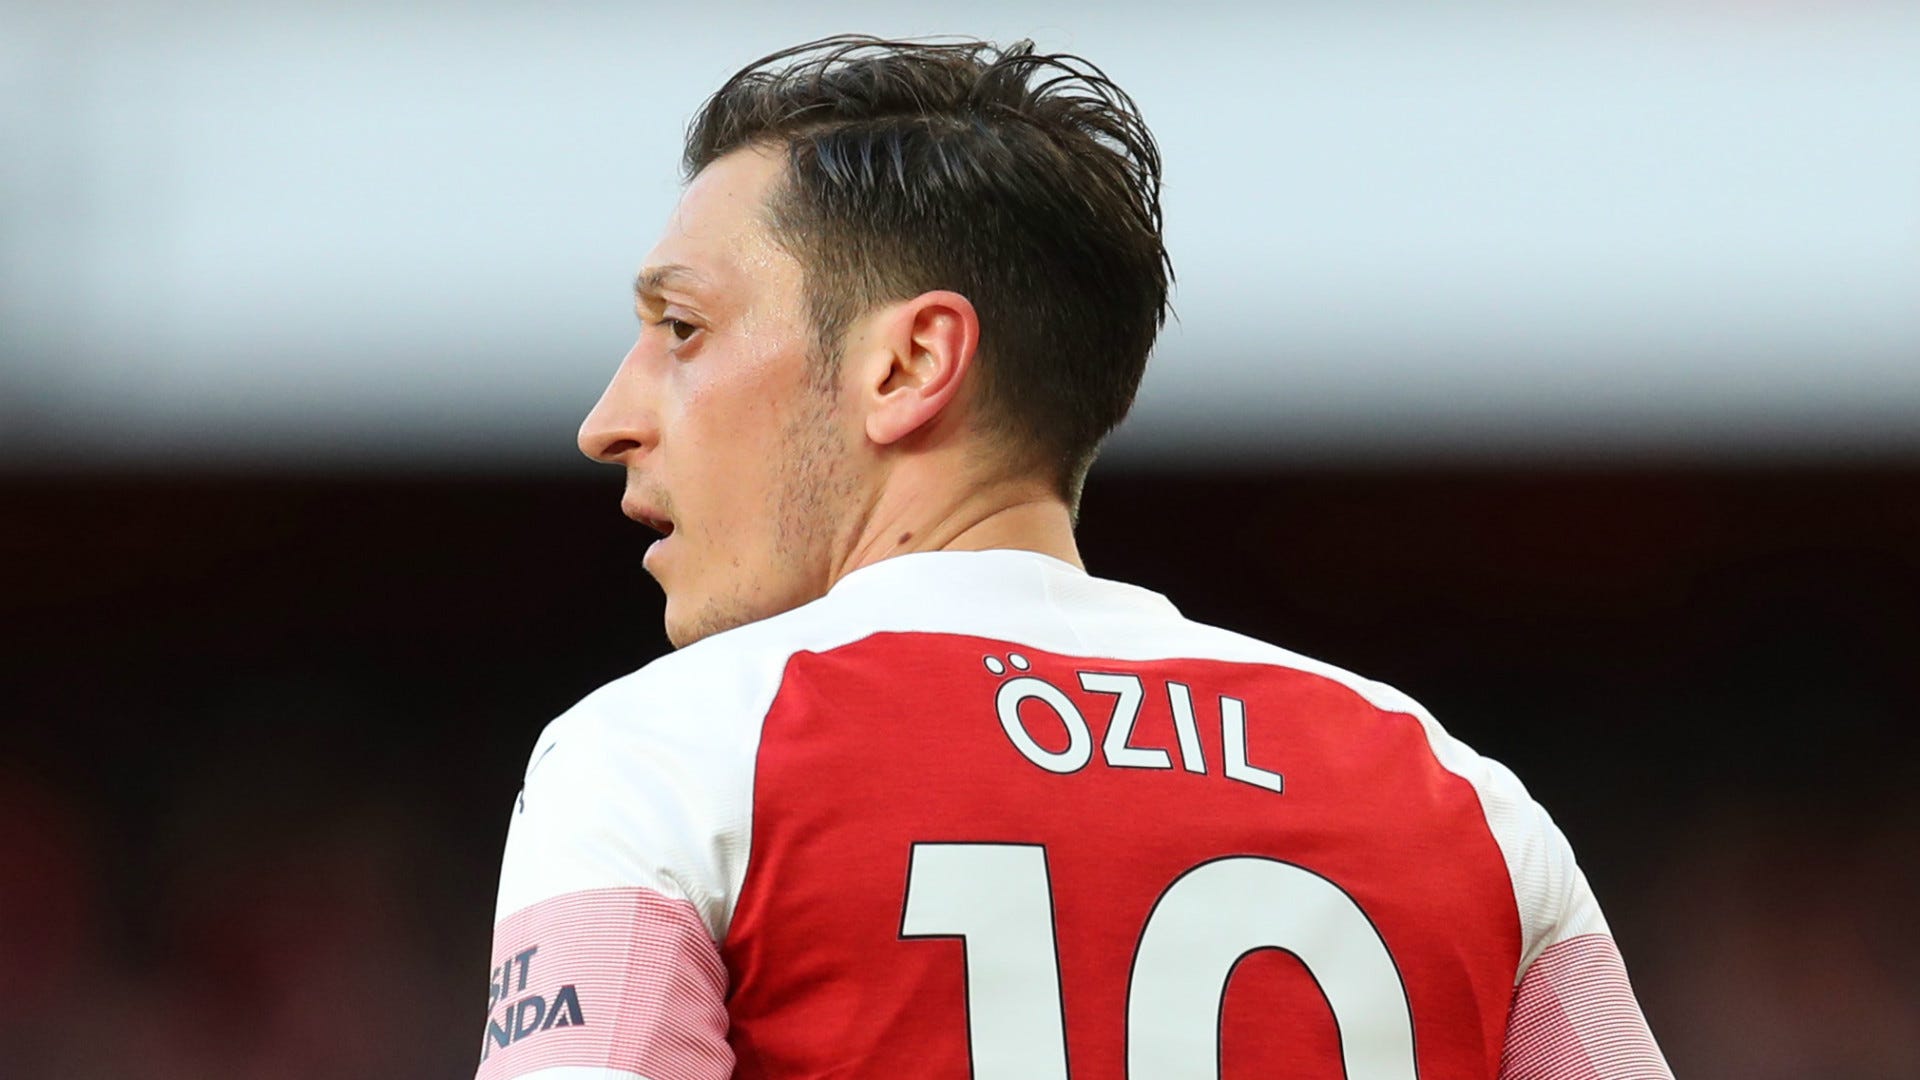 Paul Scholes urges Manchester United to sign Mesut Ozil - Man United News  And Transfer News | The Peoples Person